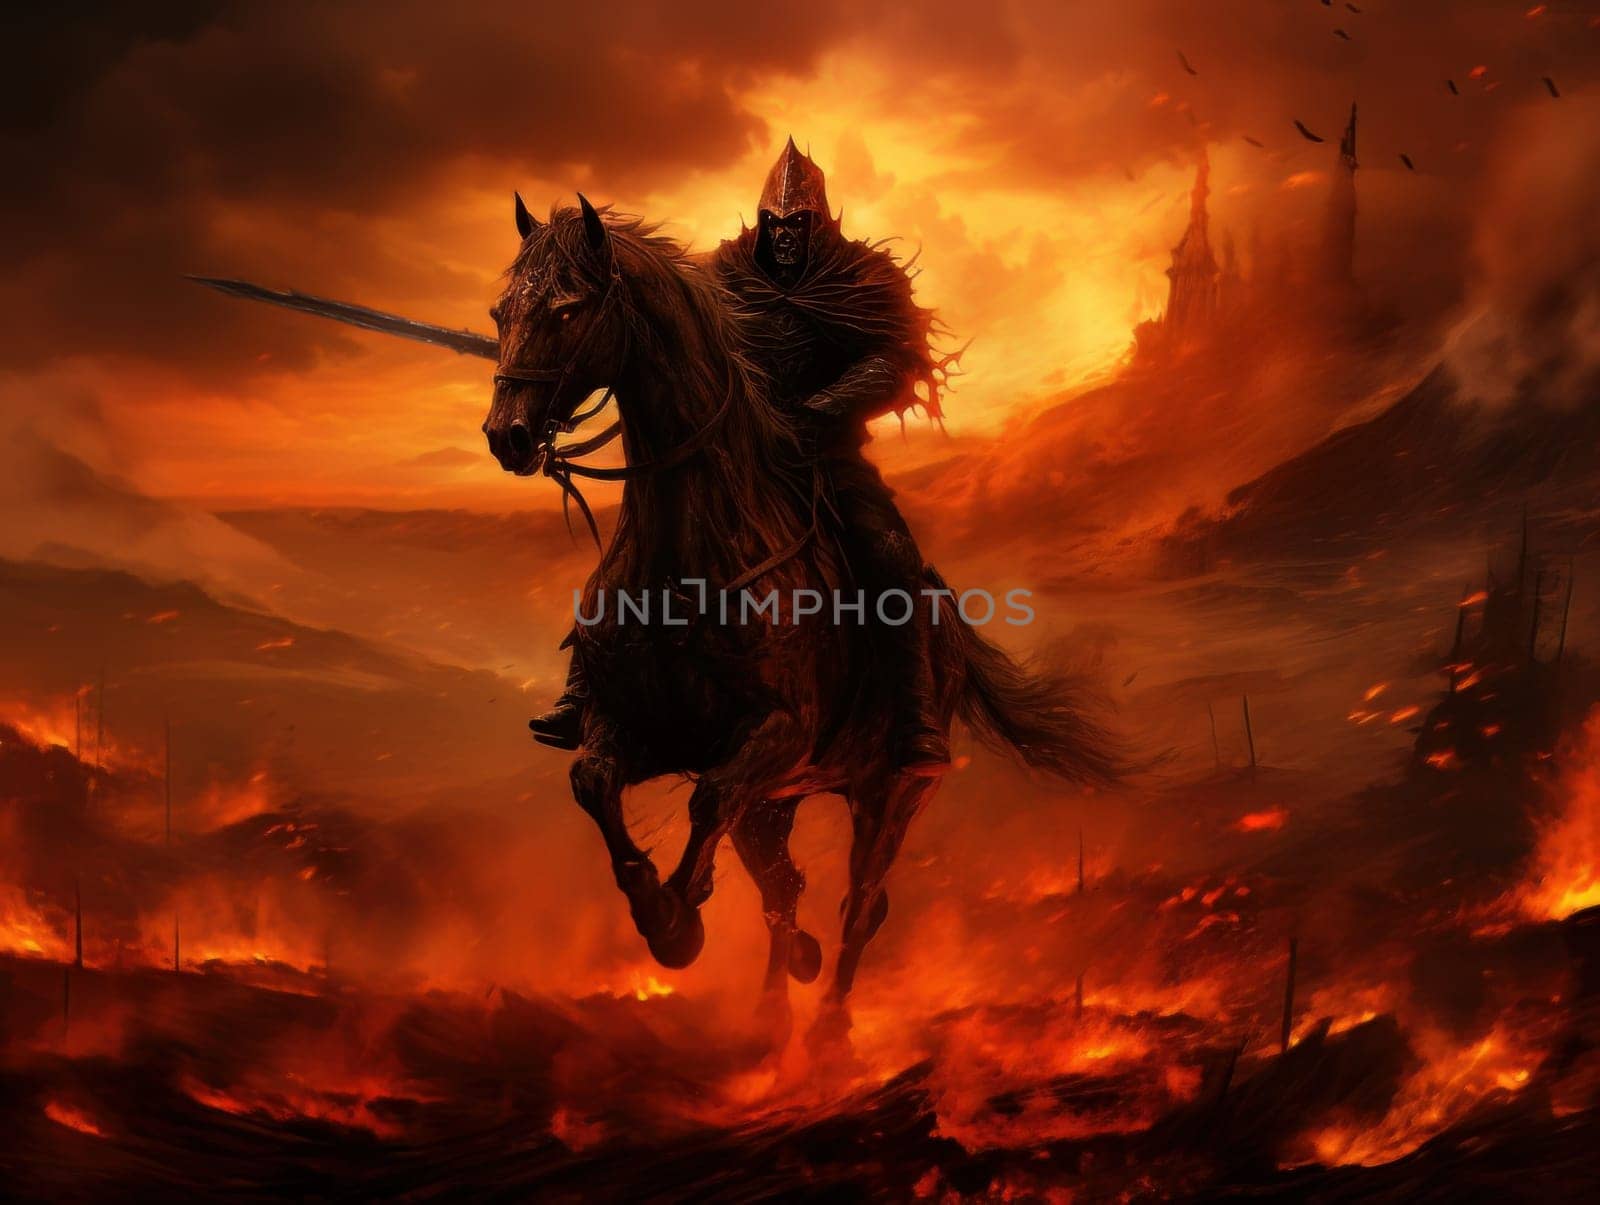 Black horseman of the apocalypse with sword riding black horse AI by but_photo